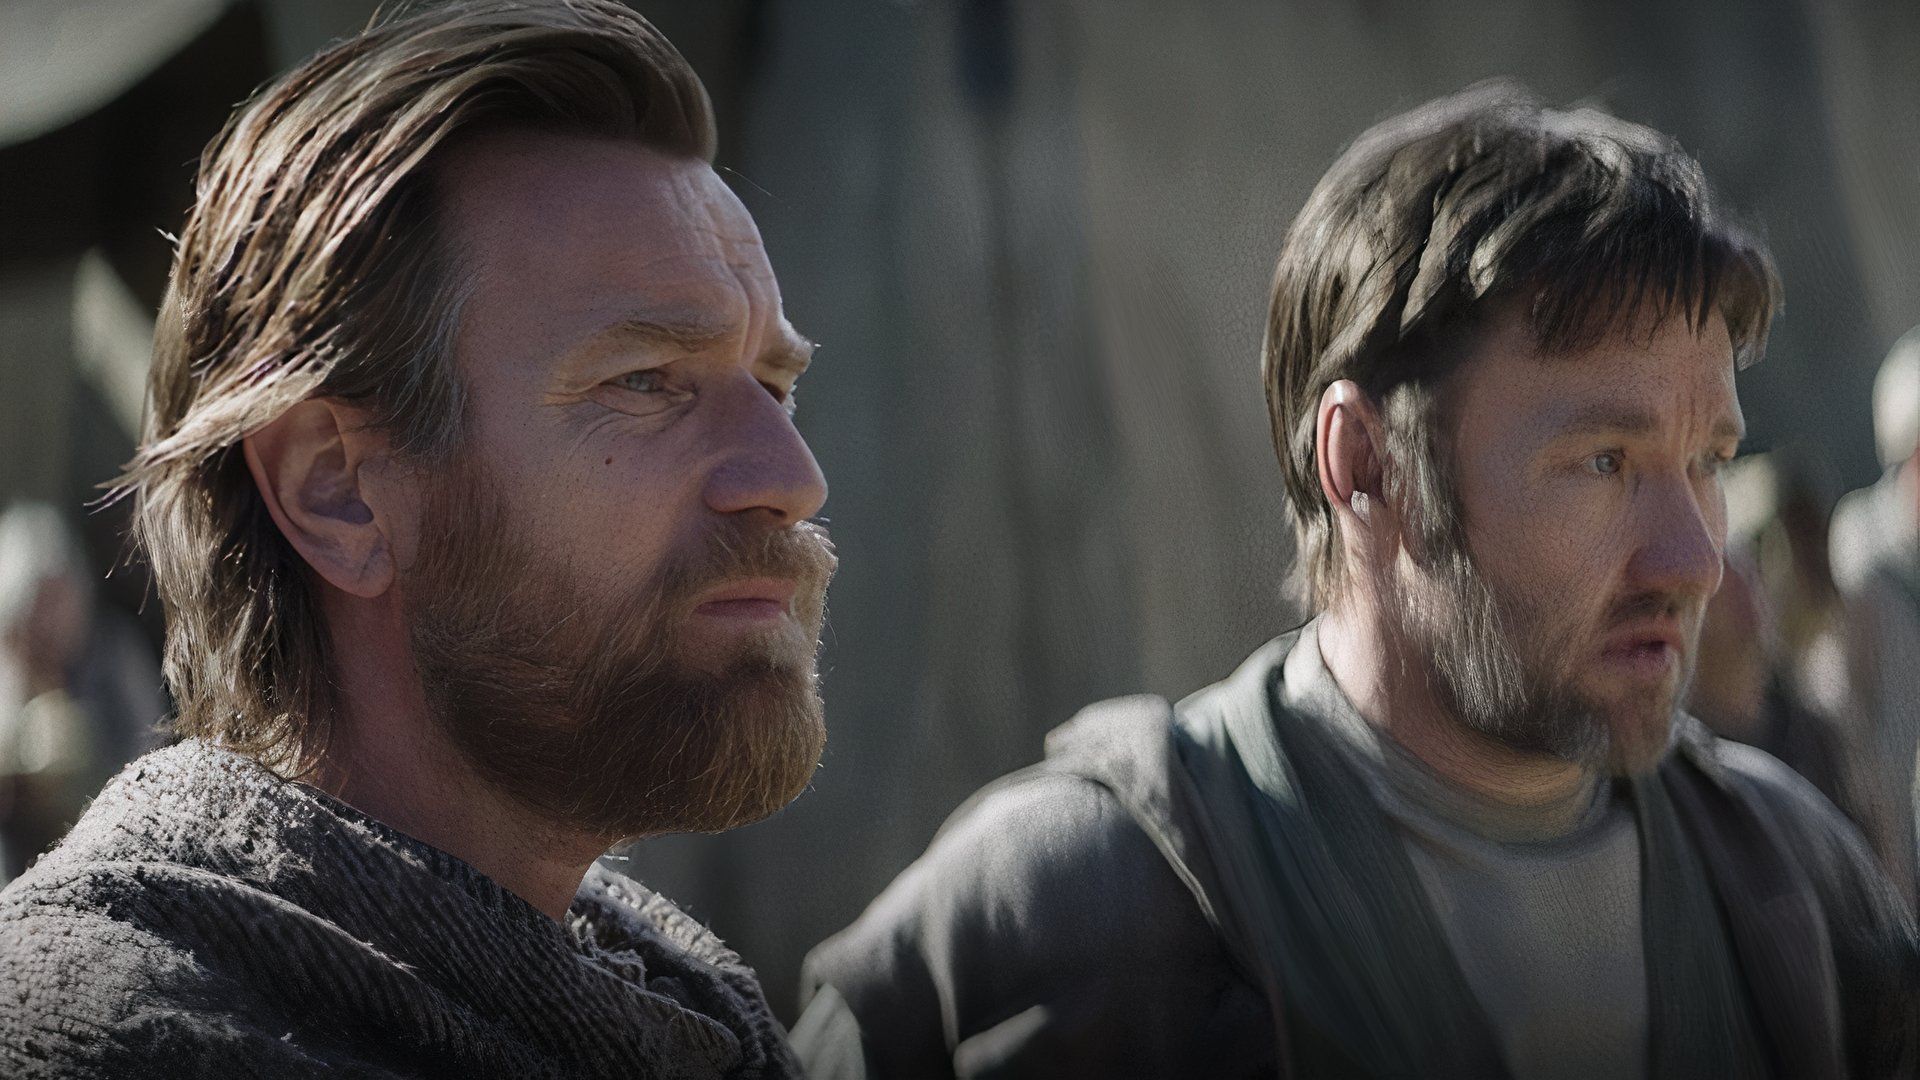 Joel Edgerton on His Character Owen Lars and his Return to the Star Wars Universe After Obi-Wan Kenobi: “I’d Love to Do More”